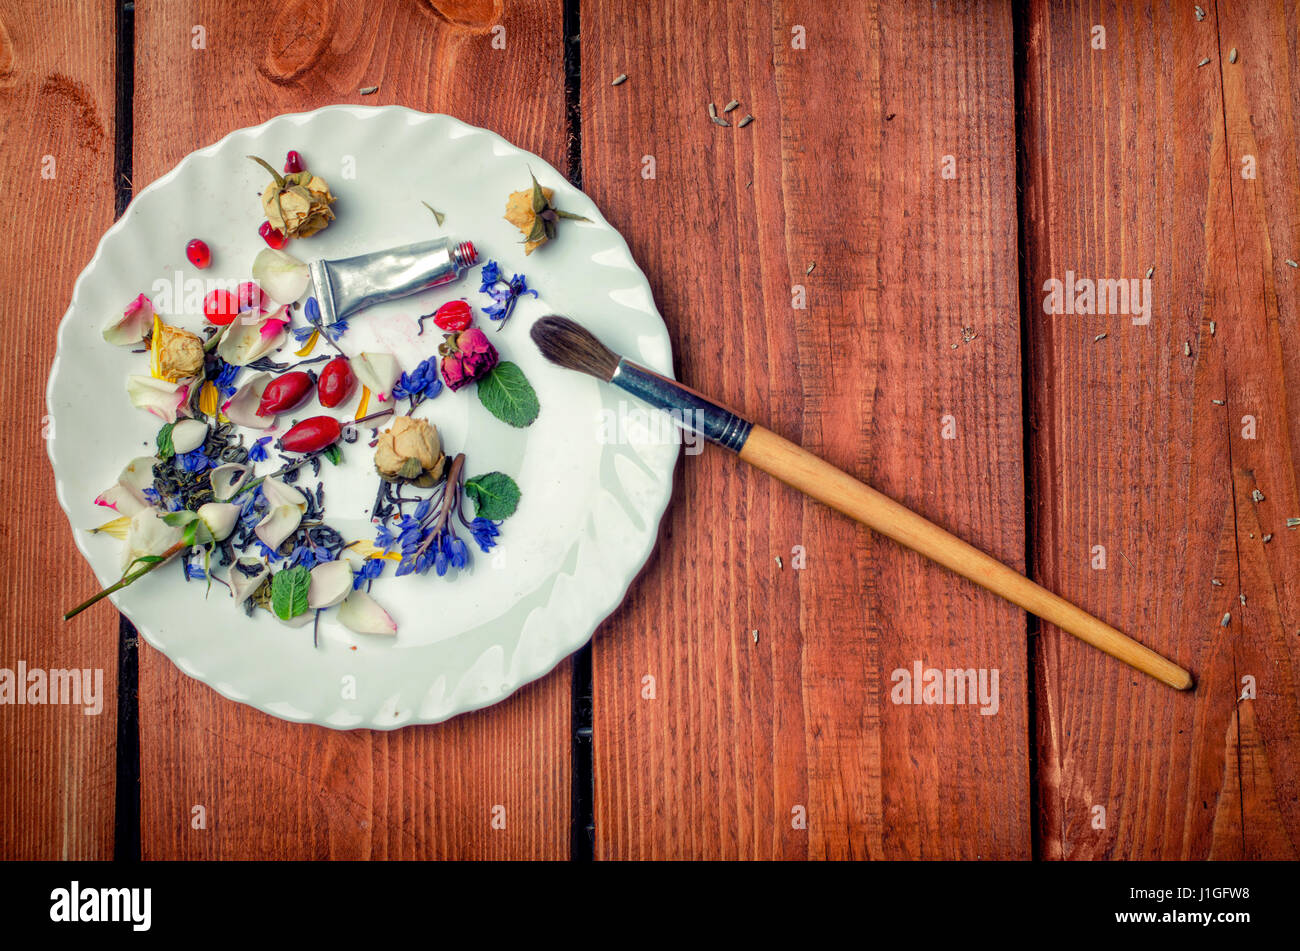 Art conceptual photo with flowers, brush, tube with paint on a plate on a wooden background Stock Photo